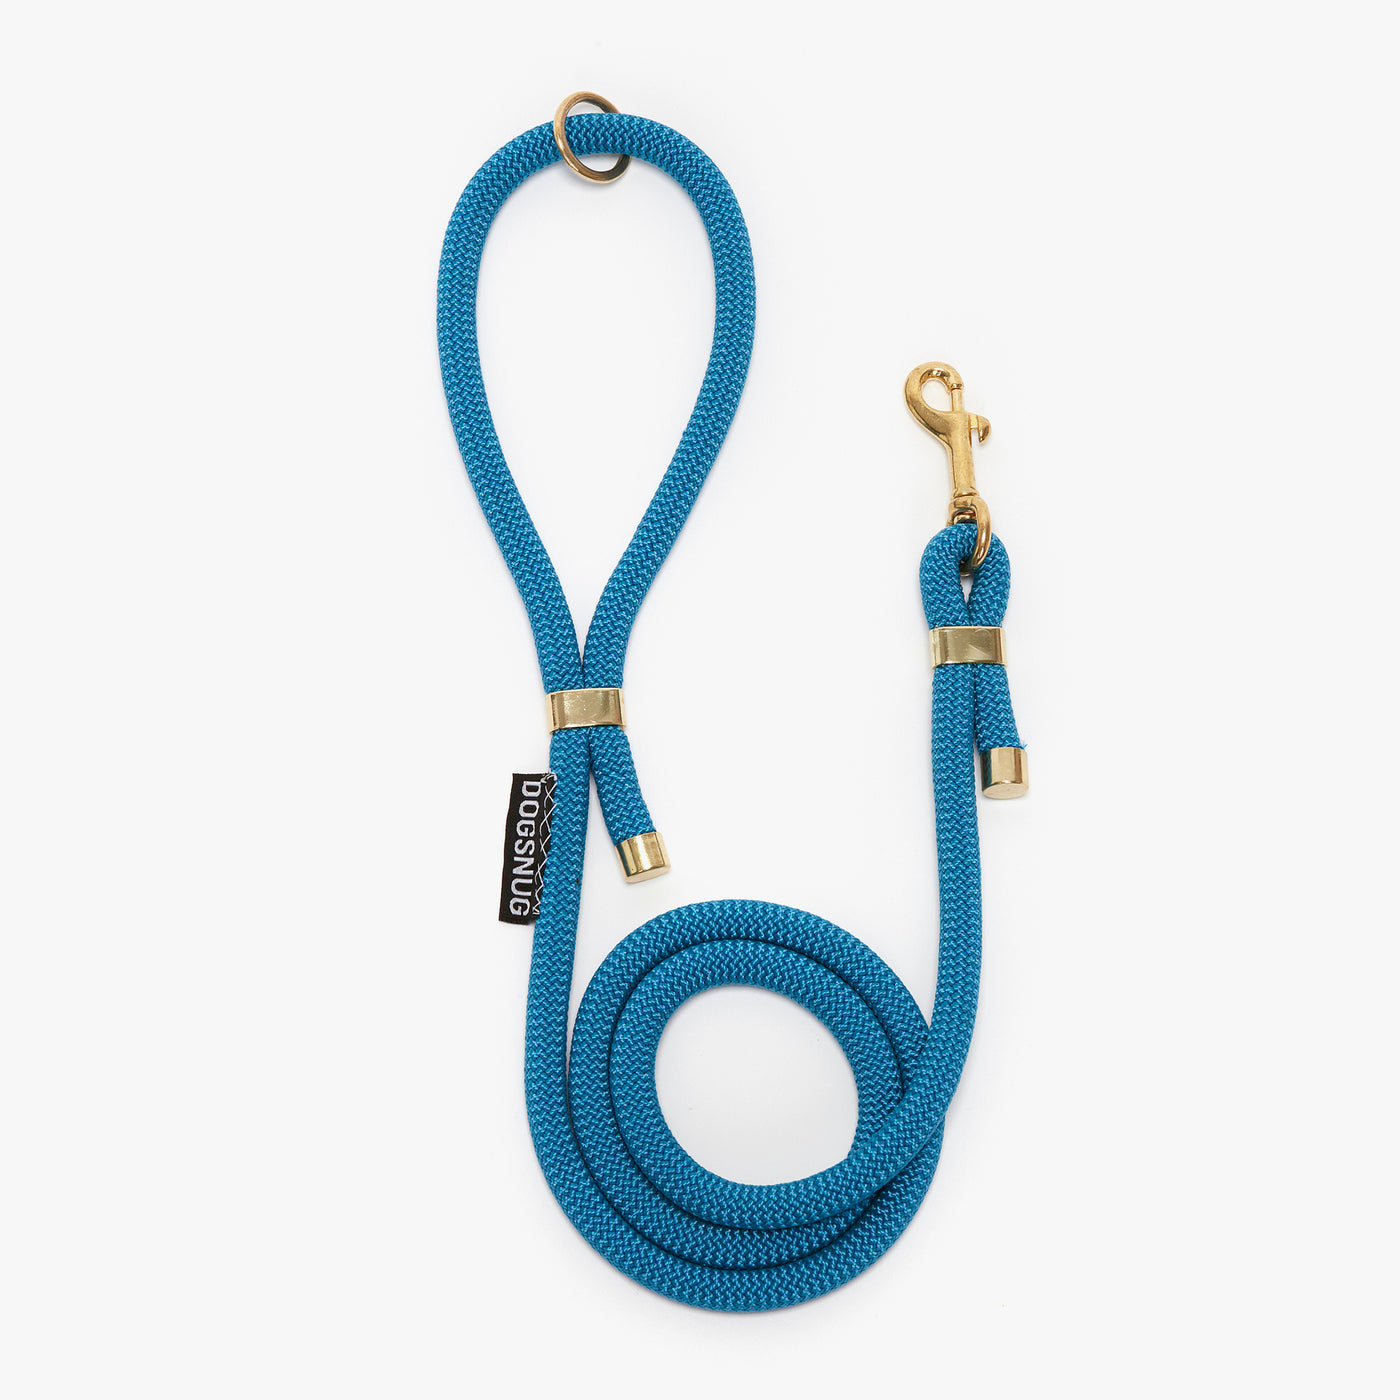 Rope dog lead in blue, standard length